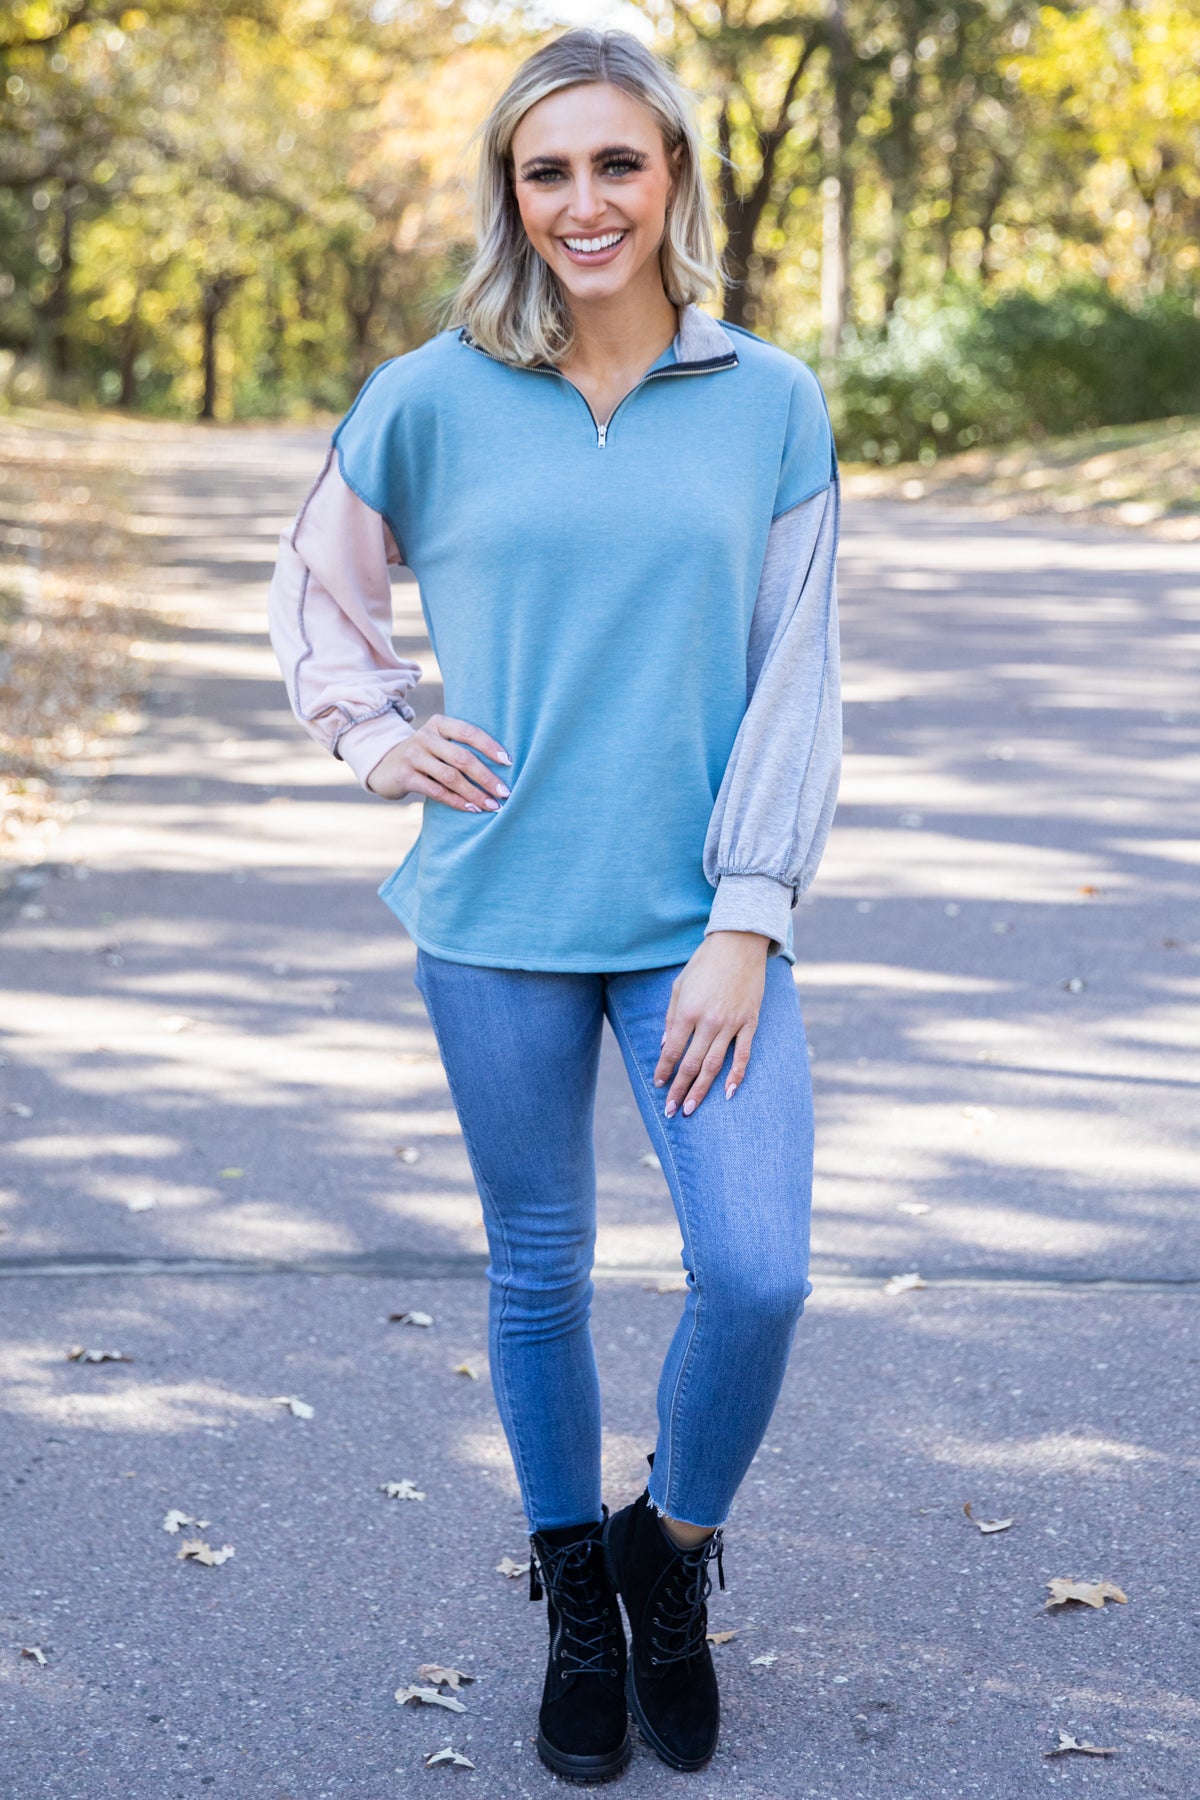 Dusty Blue Colorblock 1/4 Zip Top - Filly Flair